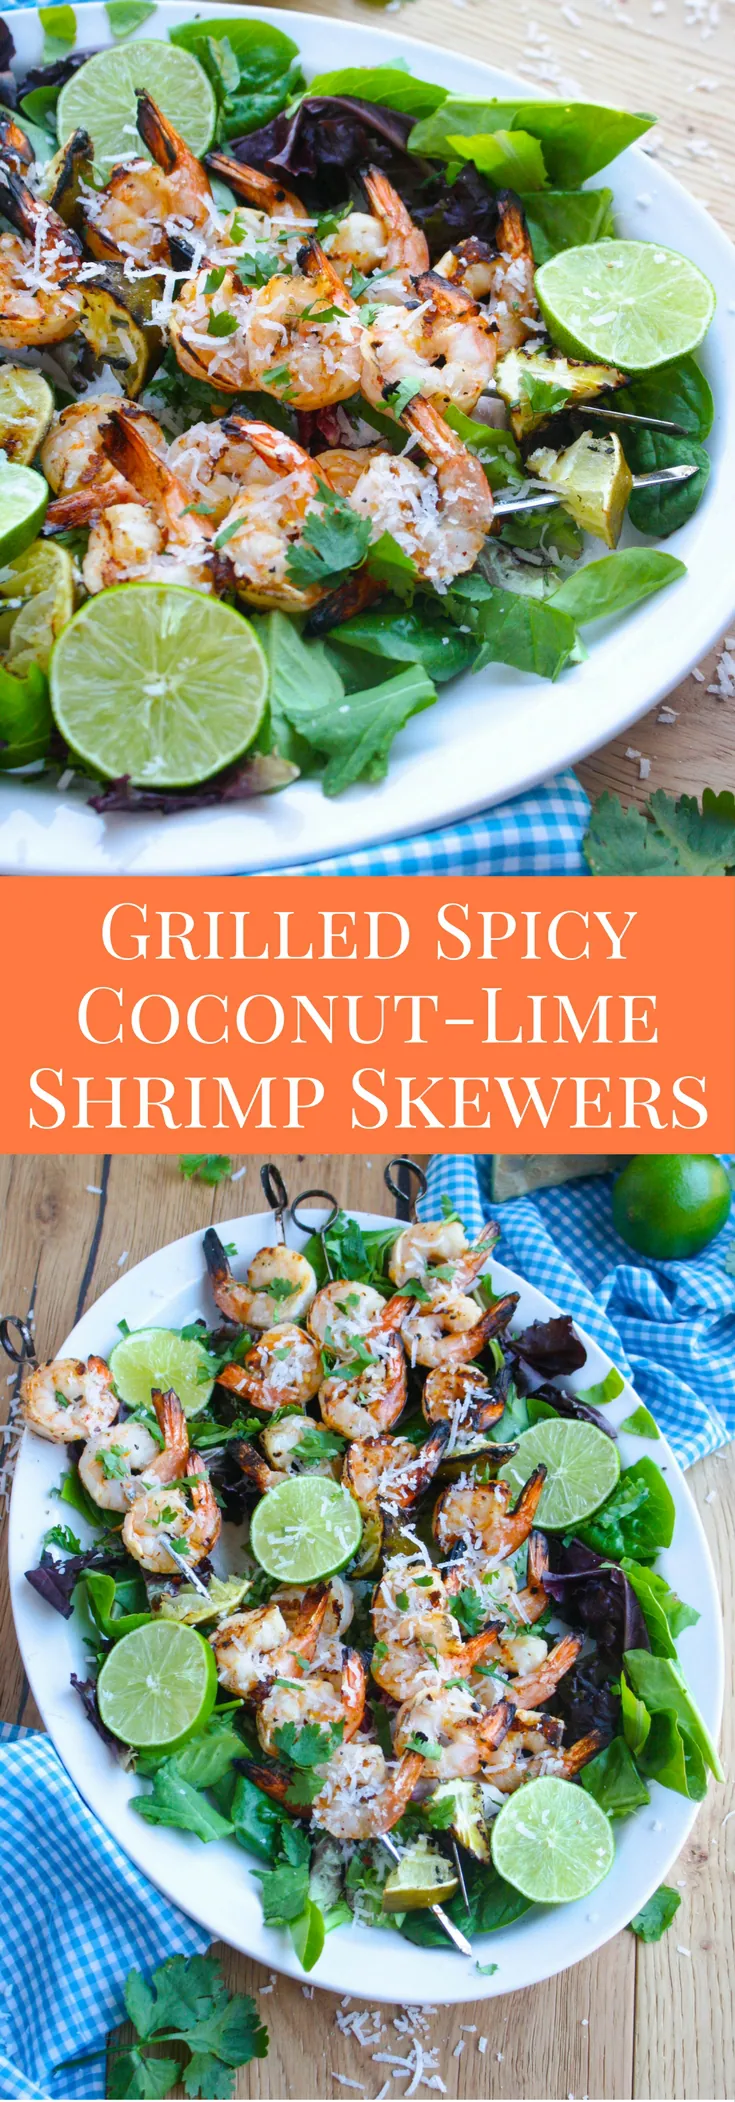 Grilled Spicy Coconut-Lime Shrimp Skewers are one of summer grilling season's stars! Big flavor and little fuss make this dish a winner!